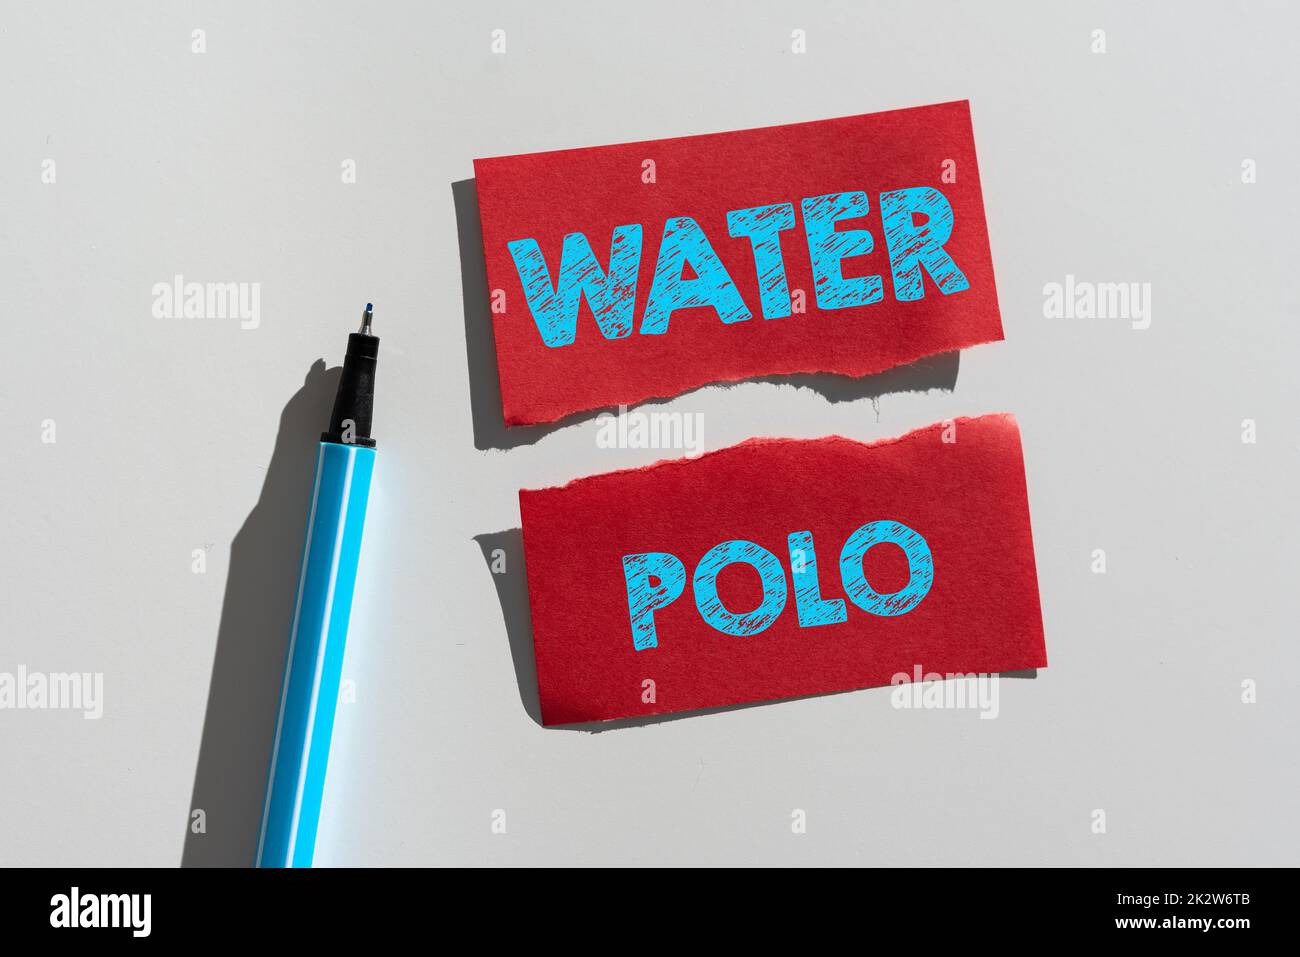 Sign displaying Water Polo. Business showcase competitive team sport played in the water between two teams -47609 Stock Photo